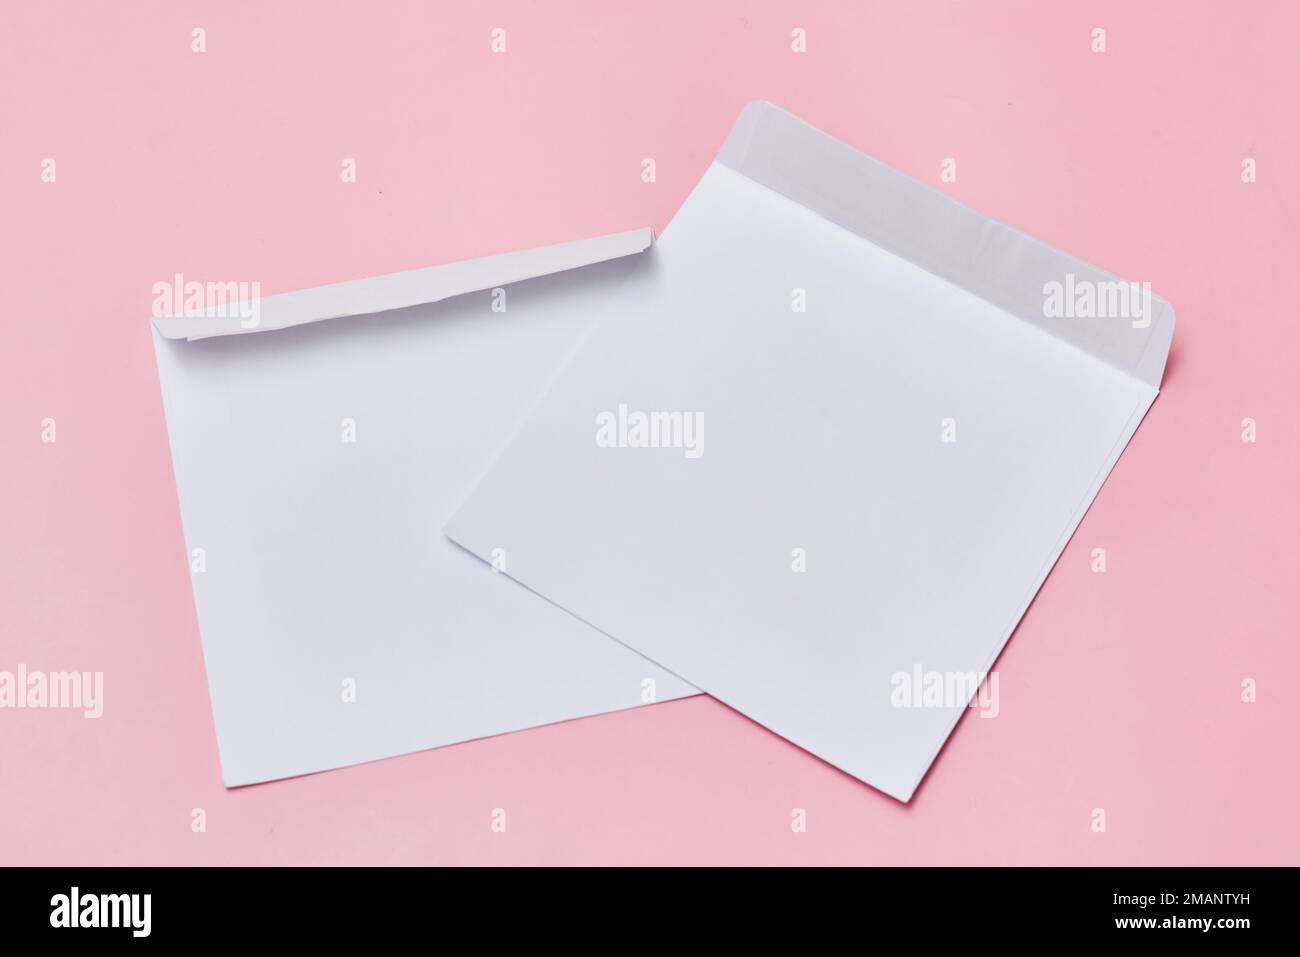 two white envelopes on a pink background with copy space for your text or message, top view stock photo Stock Photo